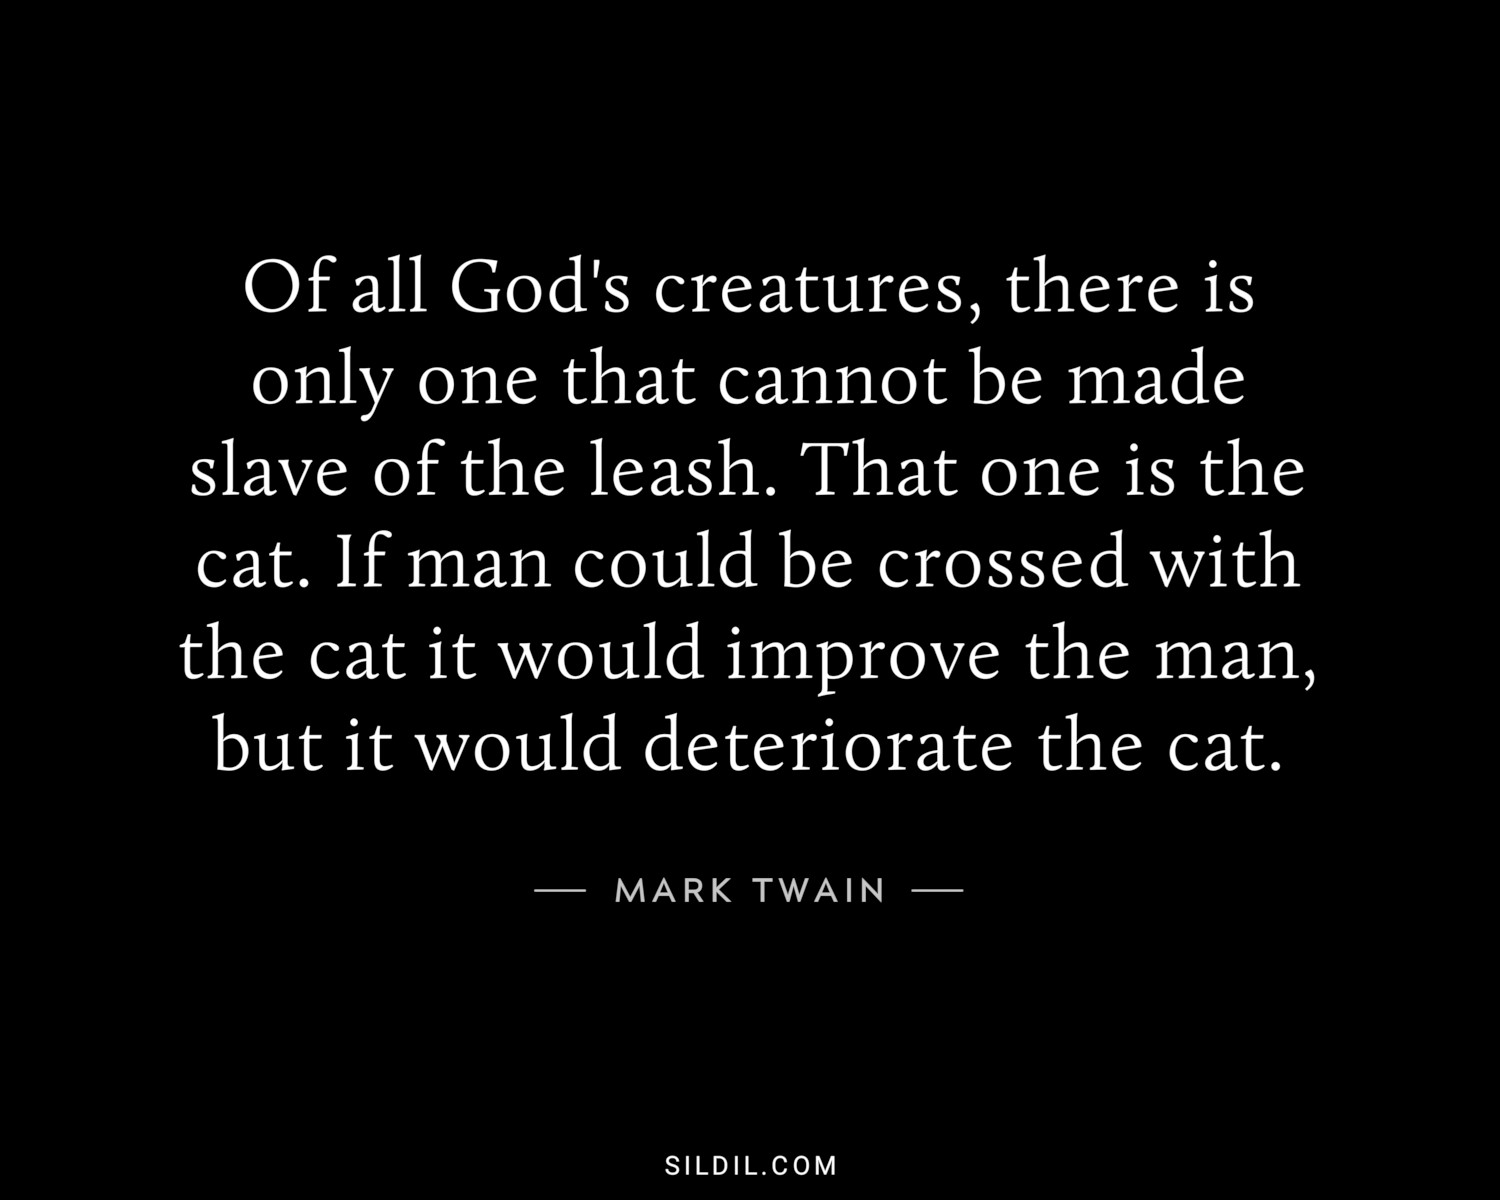 Of all God's creatures, there is only one that cannot be made slave of the leash. That one is the cat. If man could be crossed with the cat it would improve the man, but it would deteriorate the cat.